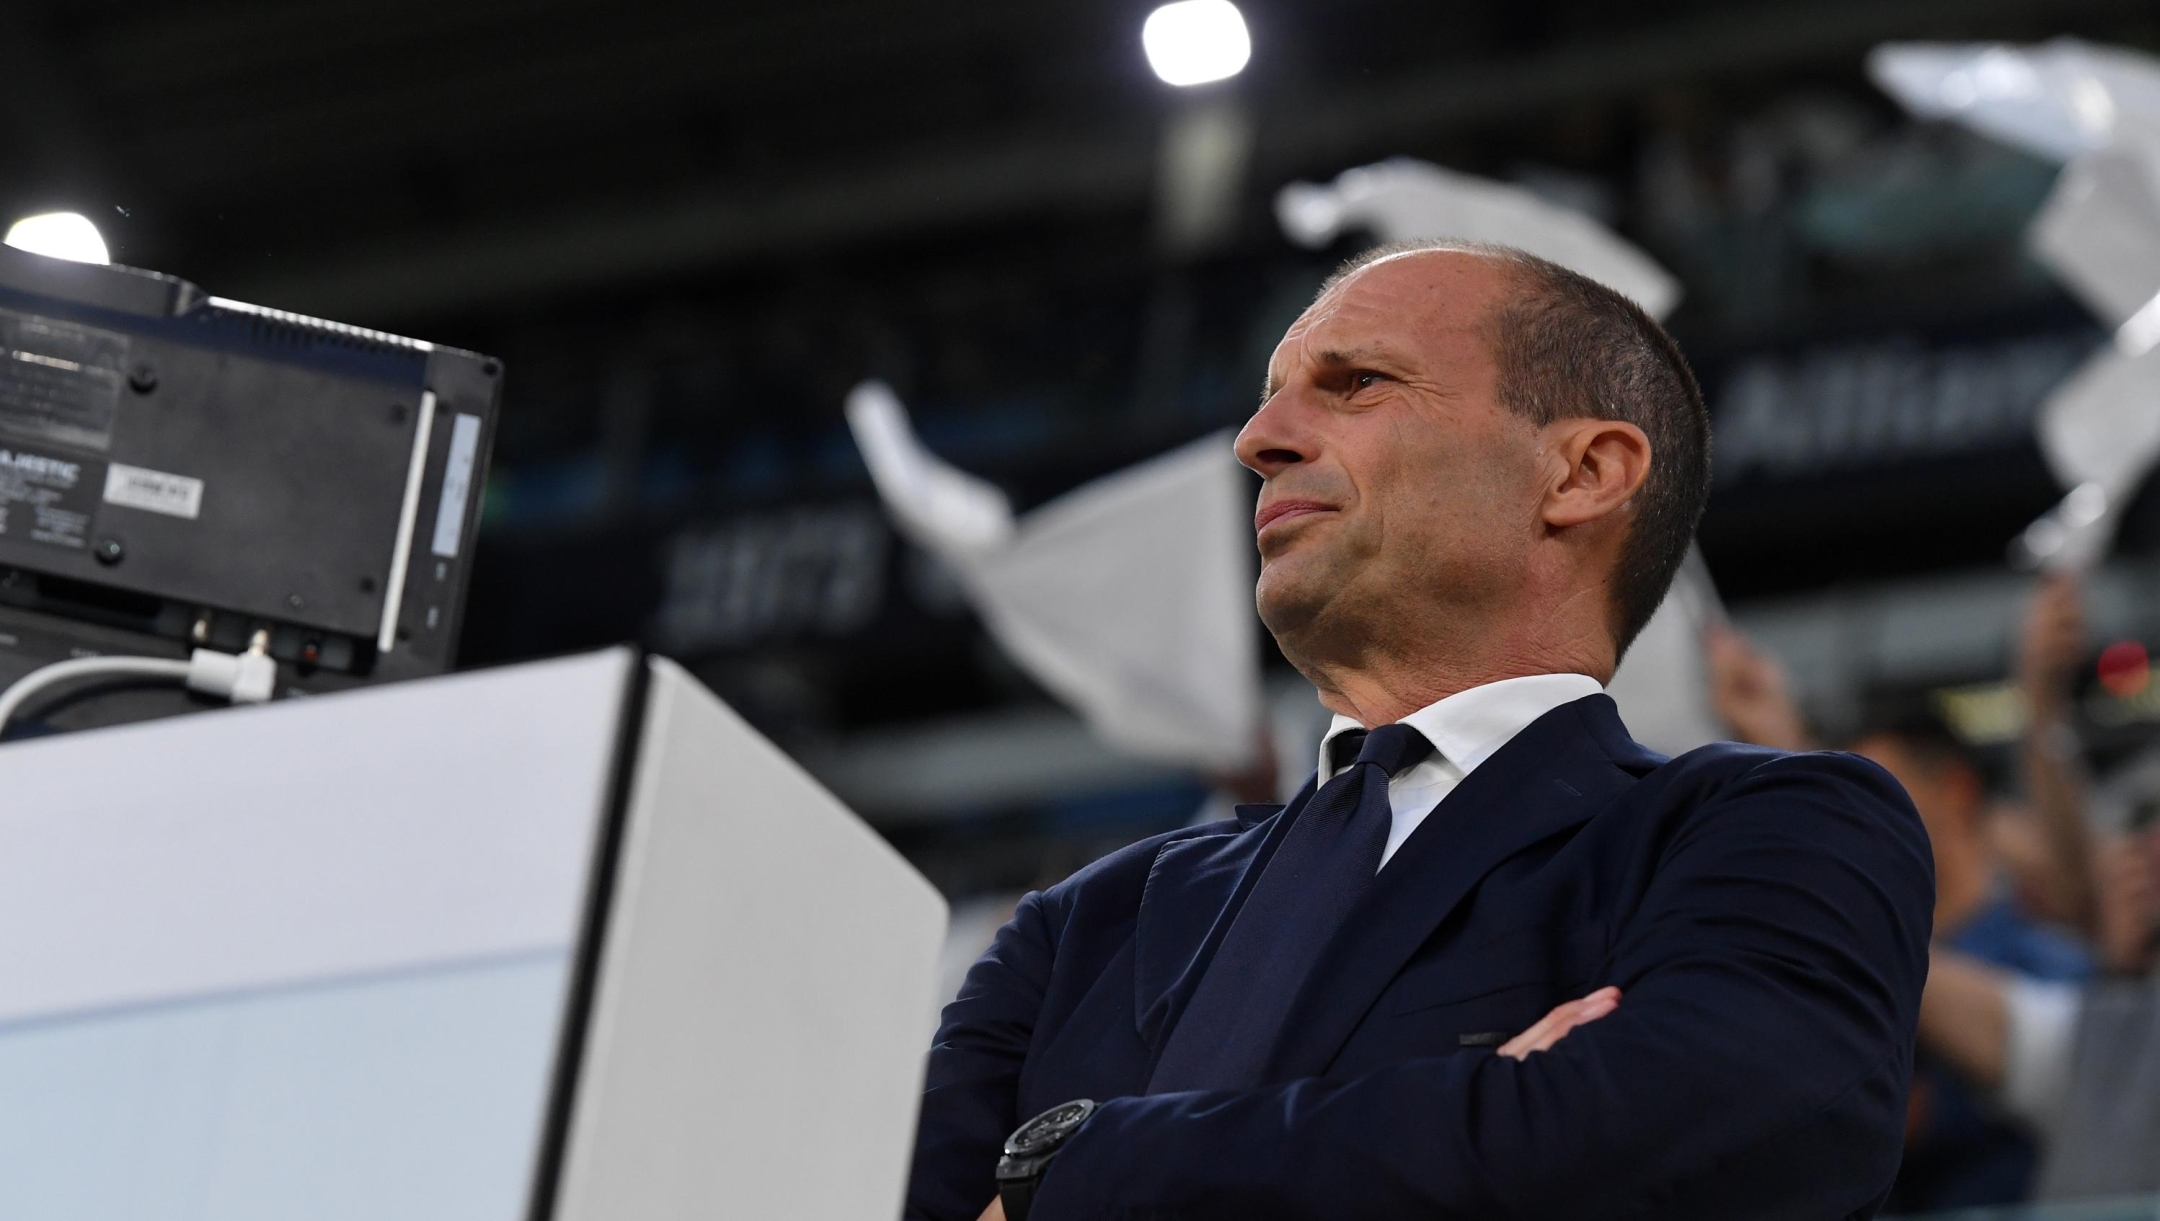 TURIN, ITALY - MAY 28: Head coach of Juventus Massimiliano Allegri looks on prior to the Serie A match between Juventus and AC MIlan at Allianz Stadium on May 28, 2023 in Turin, Italy. (Photo by Chris Ricco - Juventus FC/Juventus FC via Getty Images)